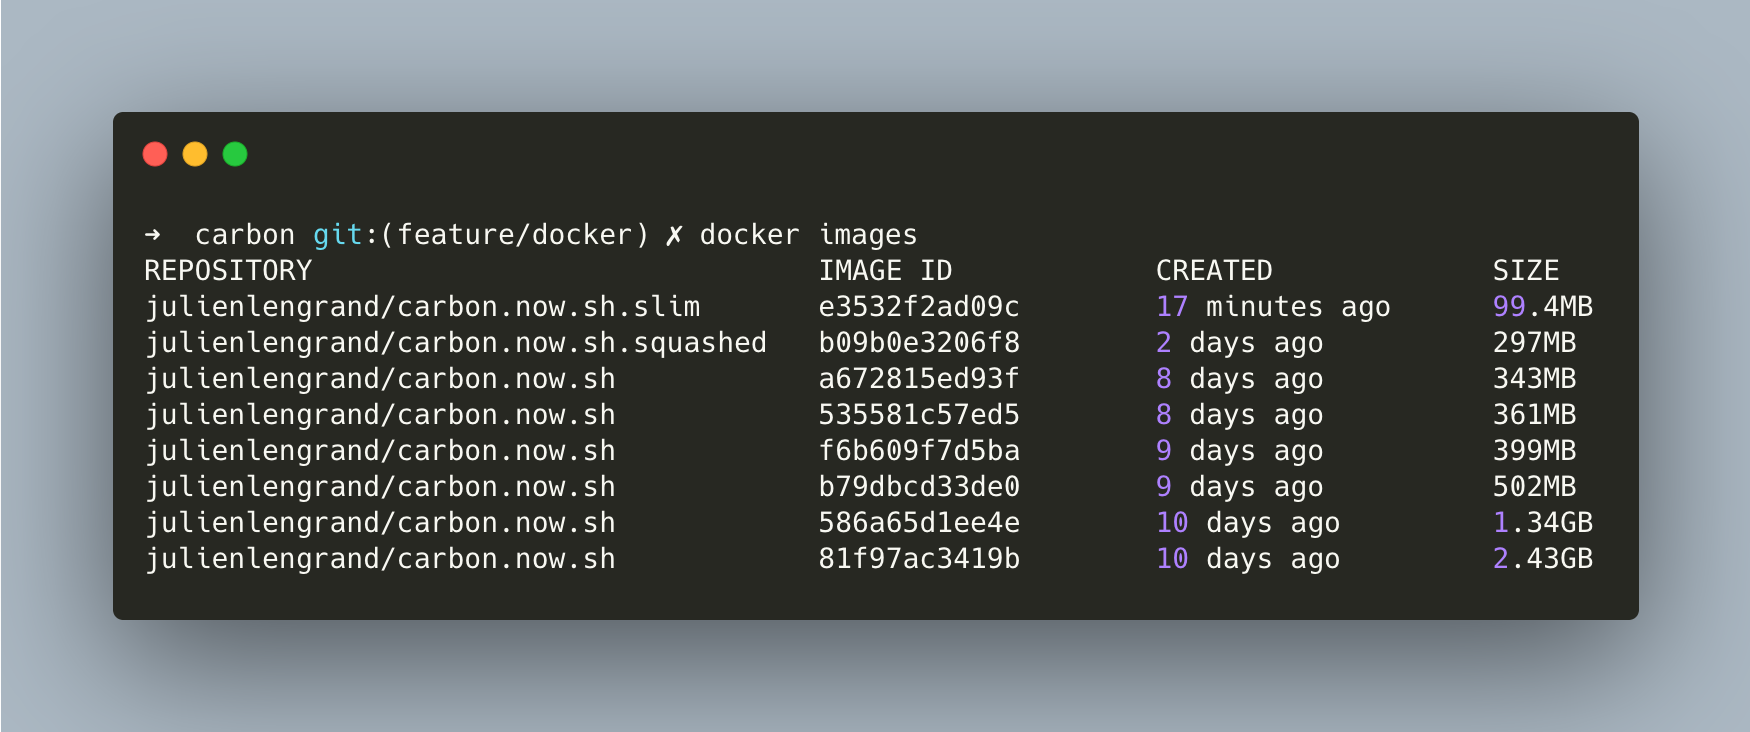 Reducing Docker's image size while creating an offline version of Carbon.now.sh